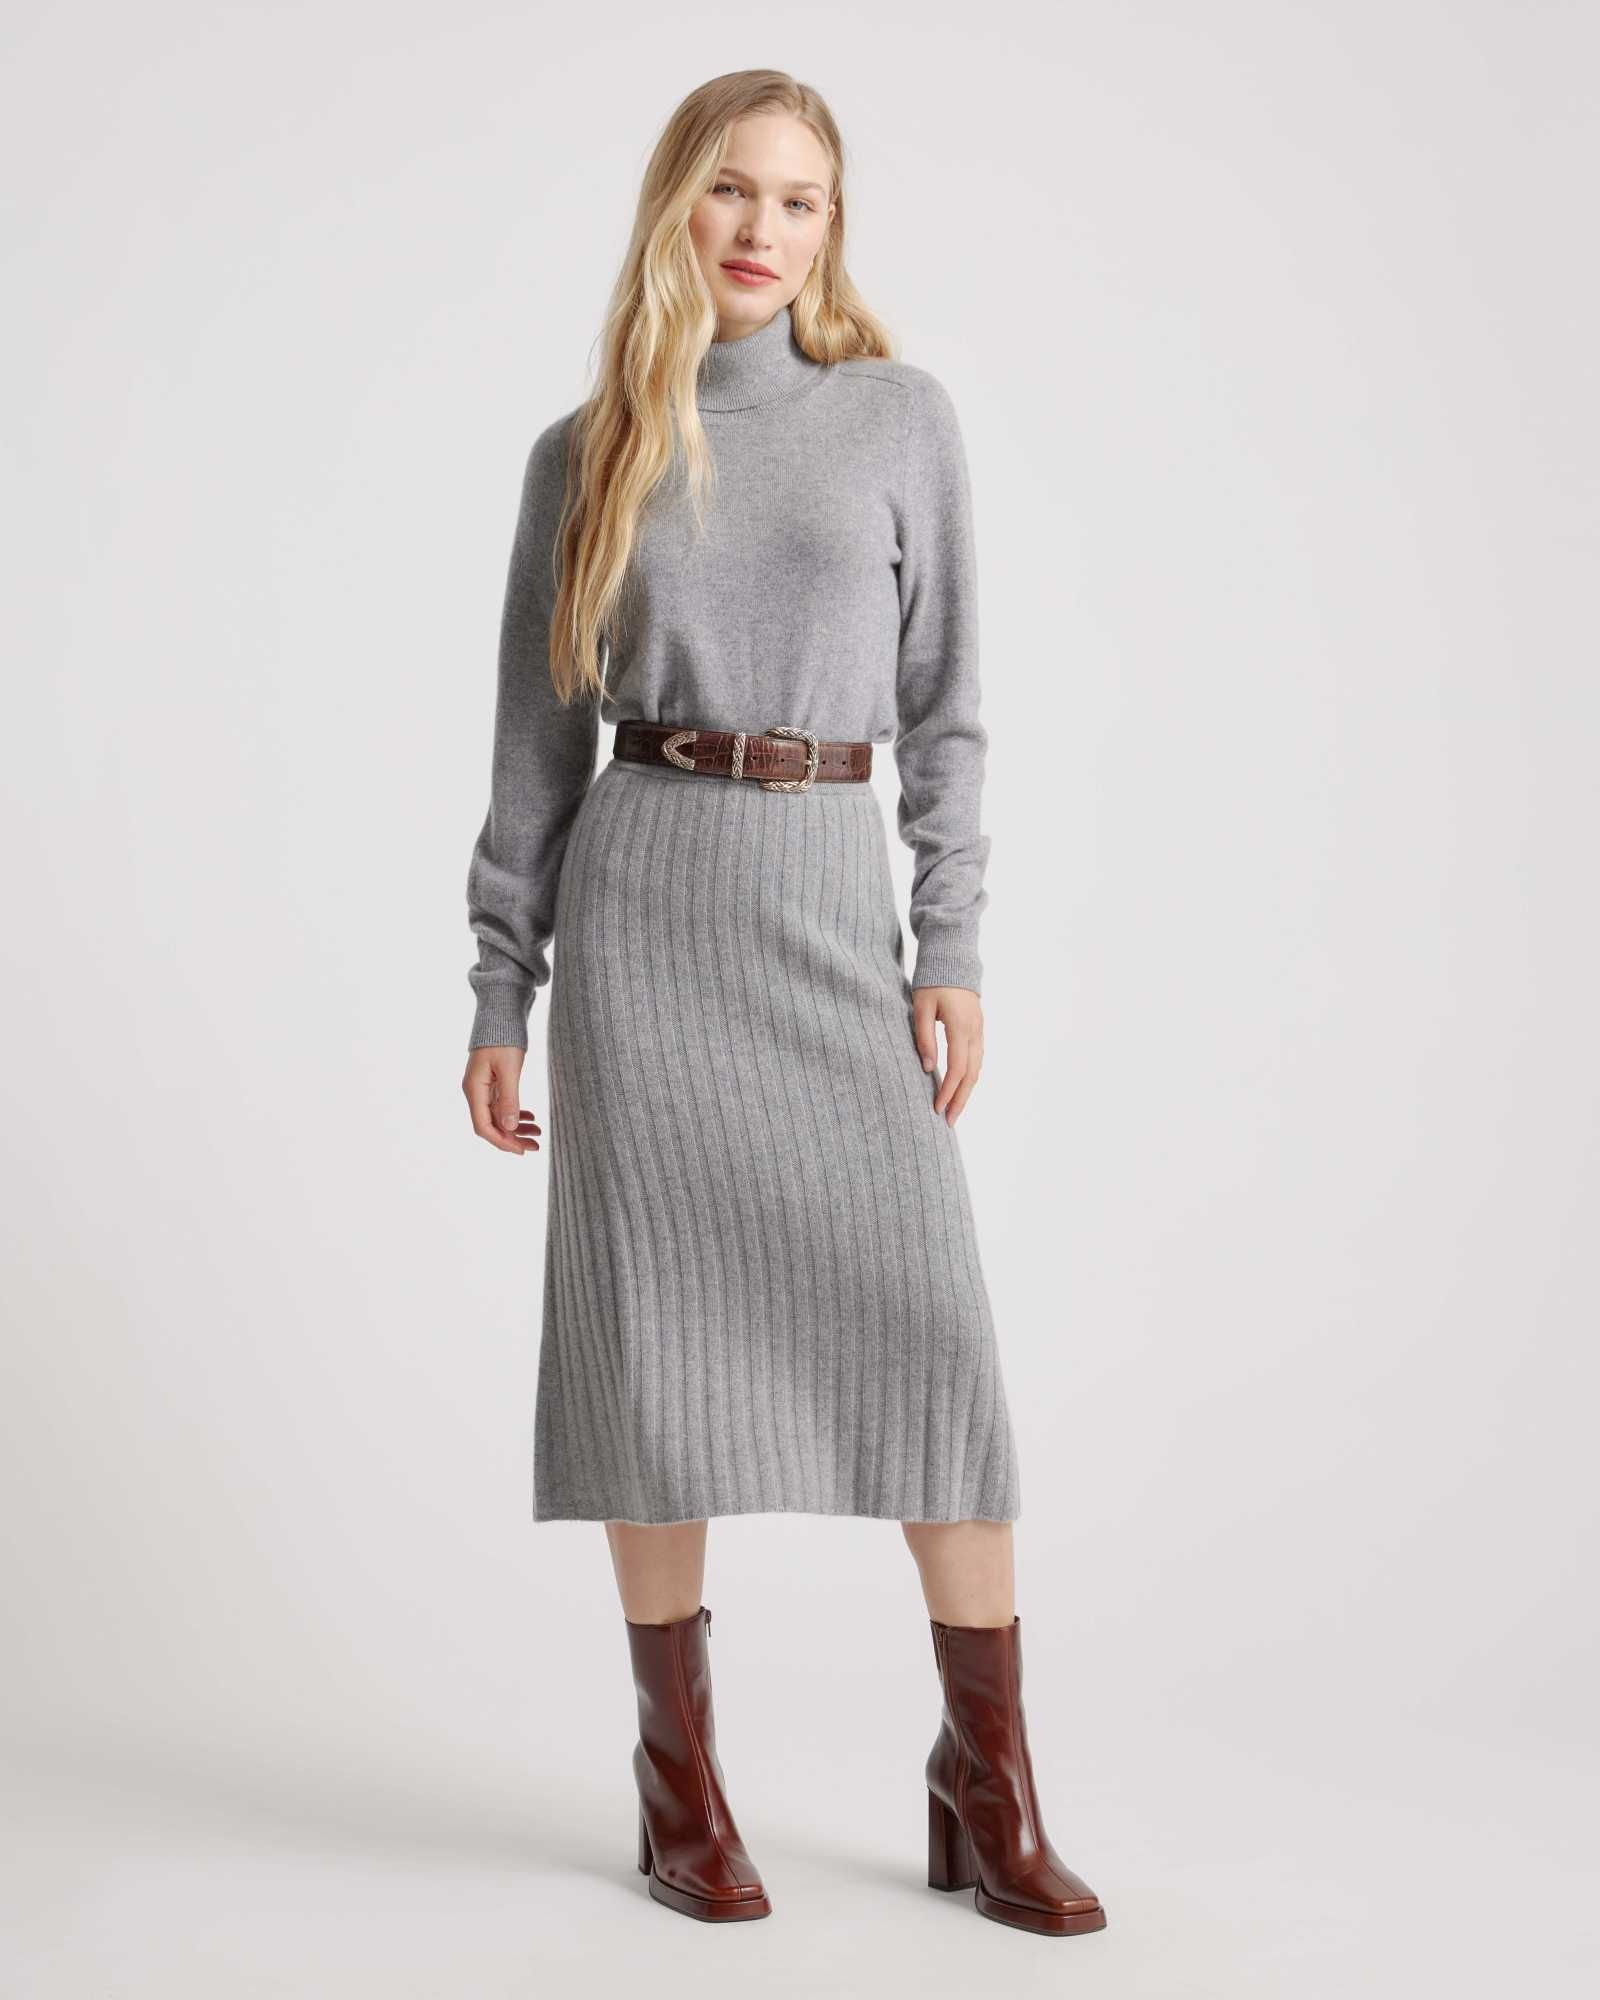 28 Best Thanksgiving Outfit Ideas for Women in 2022